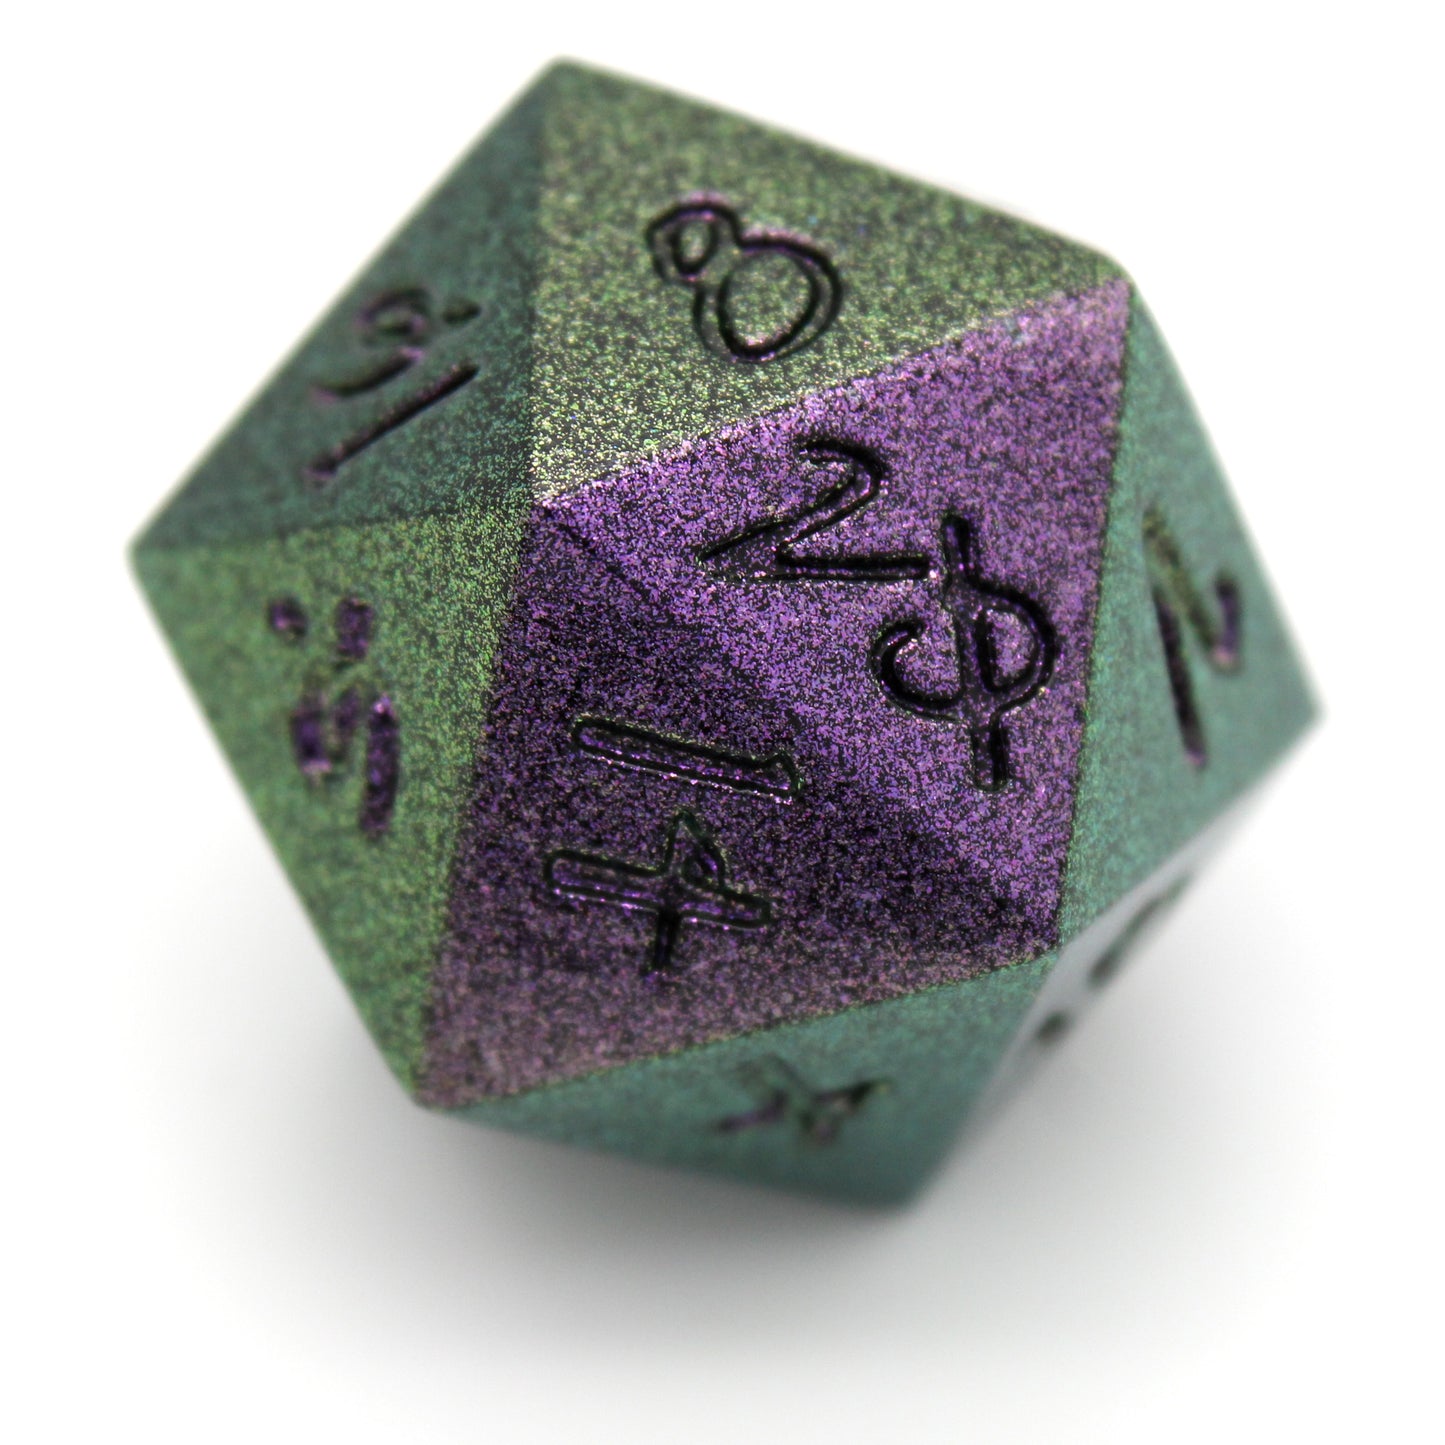 Mage Hand Sorcerer's Grasp is a 7-piece, green-and-purple-shifting metal set featuring Aabria Iyengar's handwritten numbers.